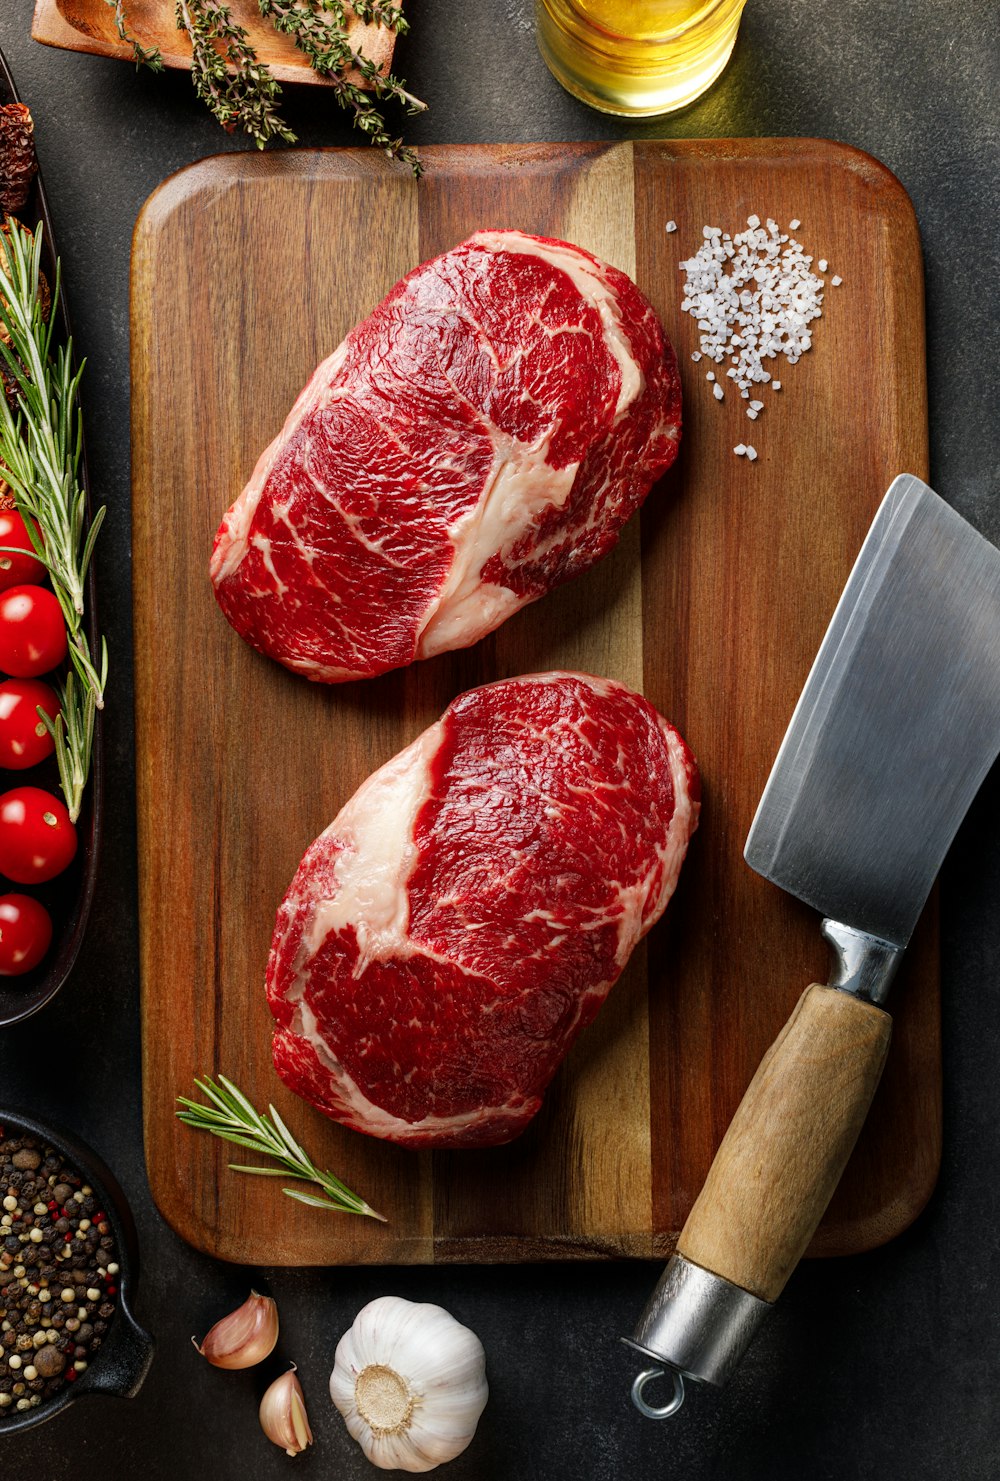 A slab of raw meat on a cutting board with vegetables and a bowl of sauce  photo – Free Steak Image on Unsplash